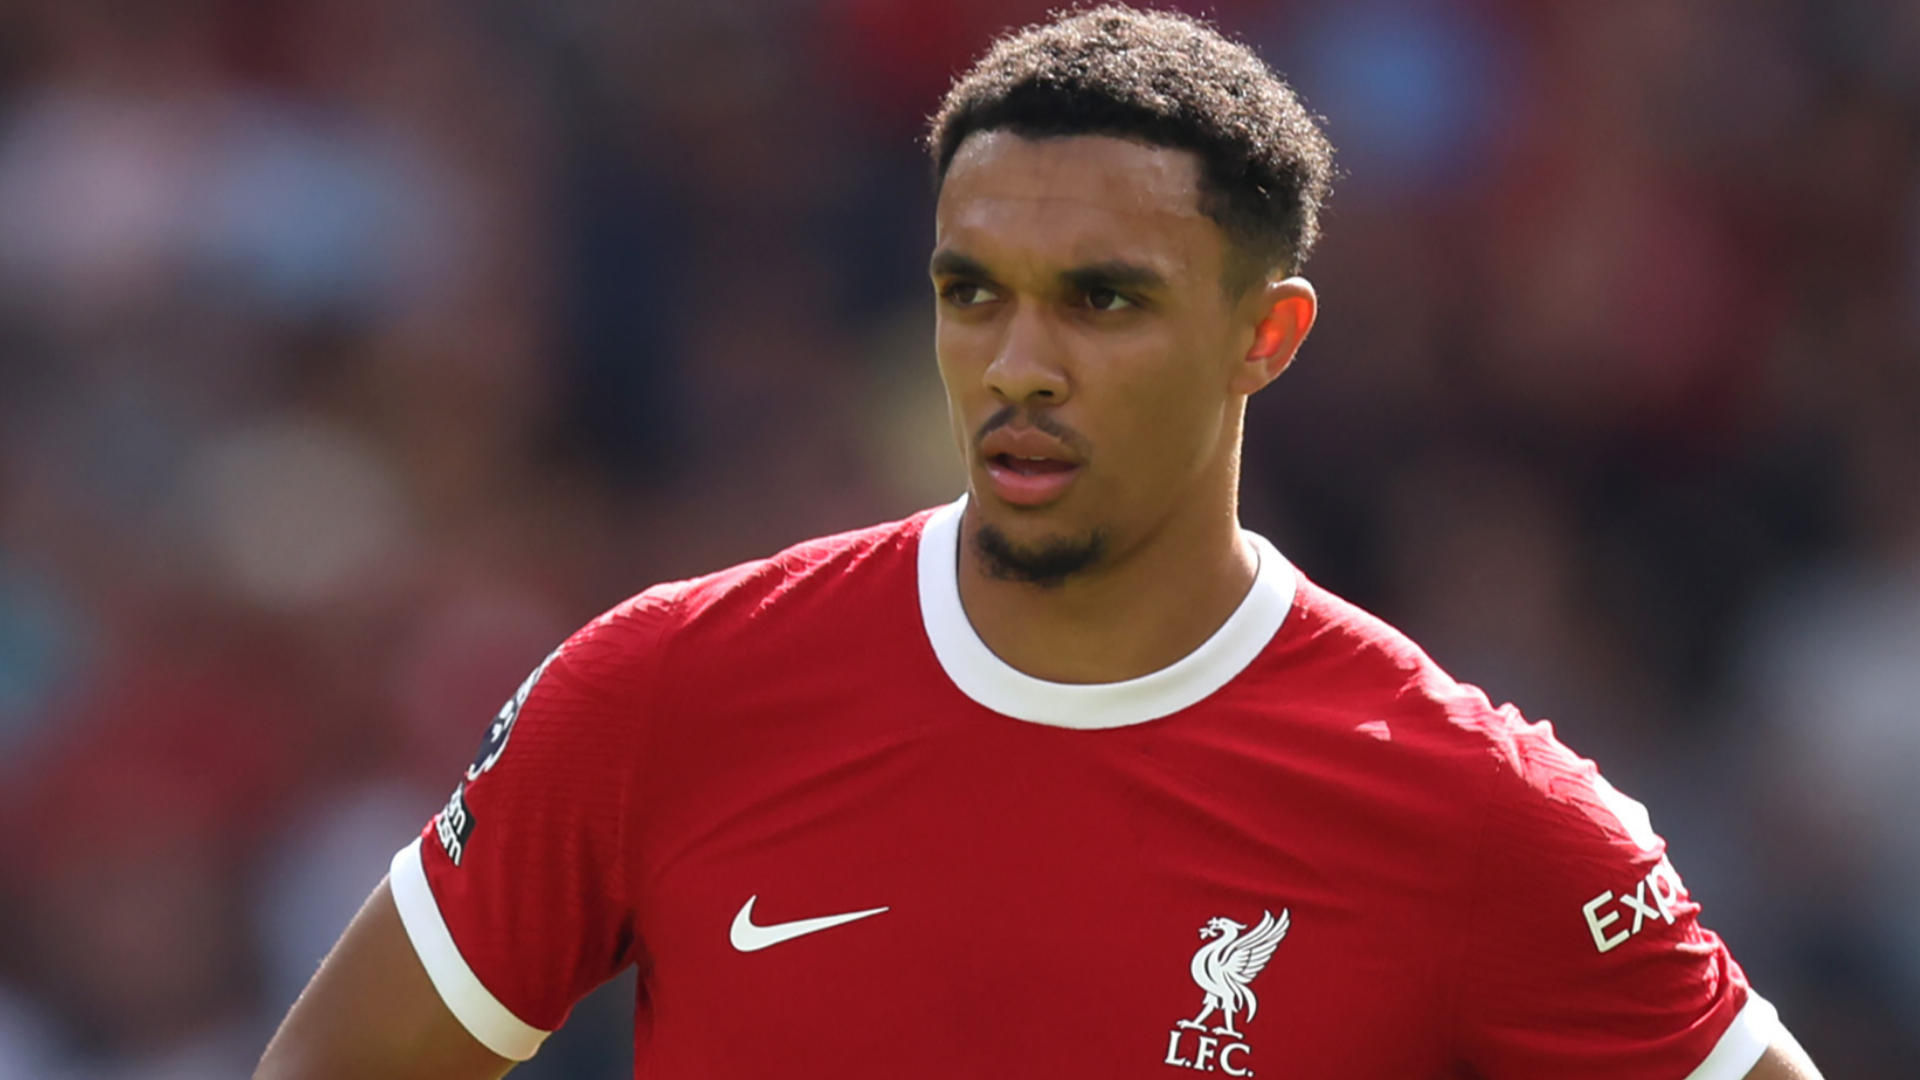 He didn't train with the team once yet' – Liverpool boss Jurgen Klopp issues Trent Alexander-Arnold hamstring injury update | Goal.com